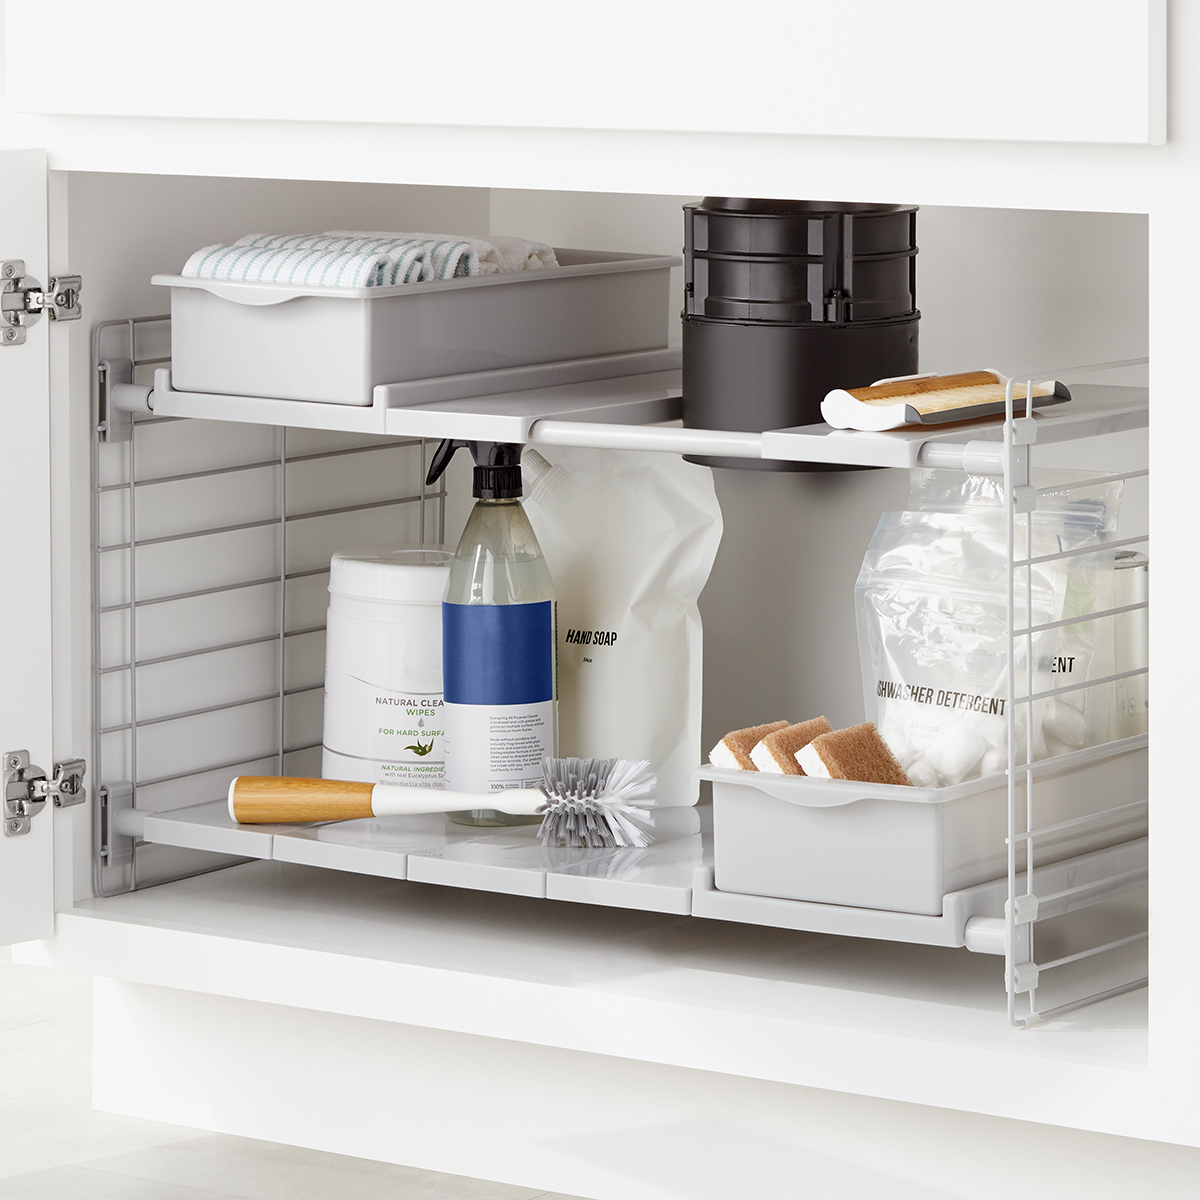 https://www.containerstore.com/catalogimages/424638/10077660_Expandable_Undersink_Organi.jpg